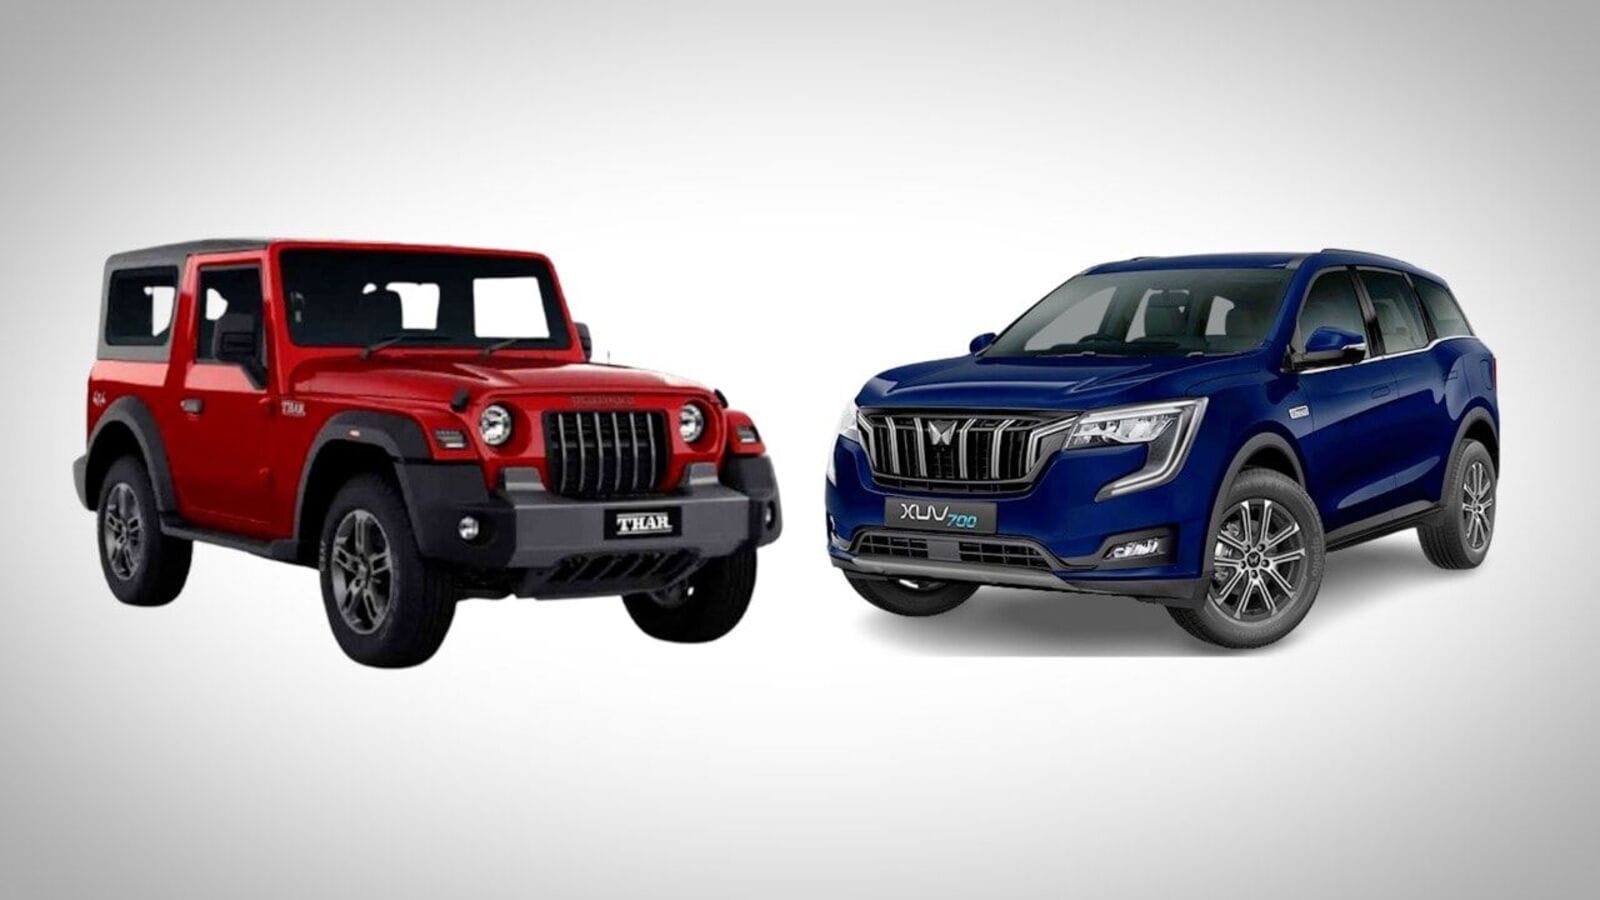 XUV700 to Thar, Mahindra offers subscription model for its new SUVs